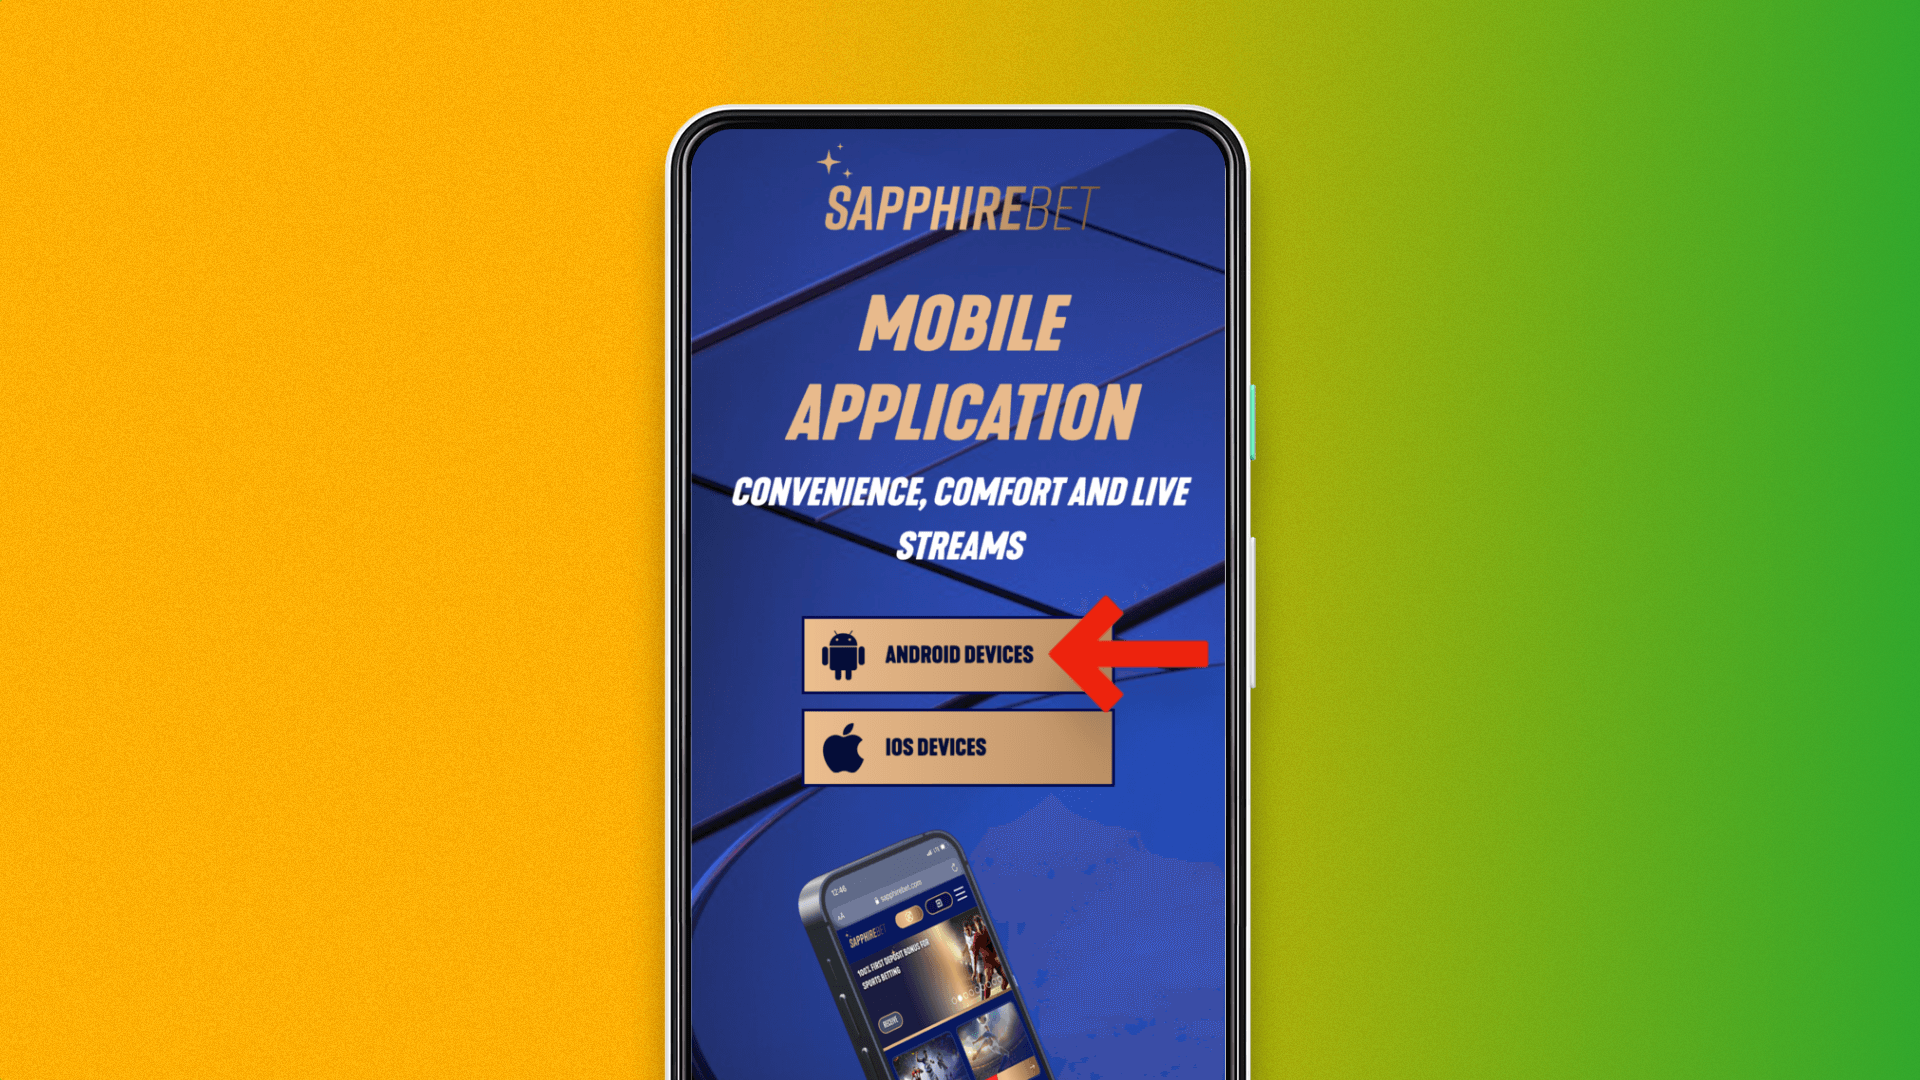 Select the SapphireBet app for Android, then it will immediately start downloading